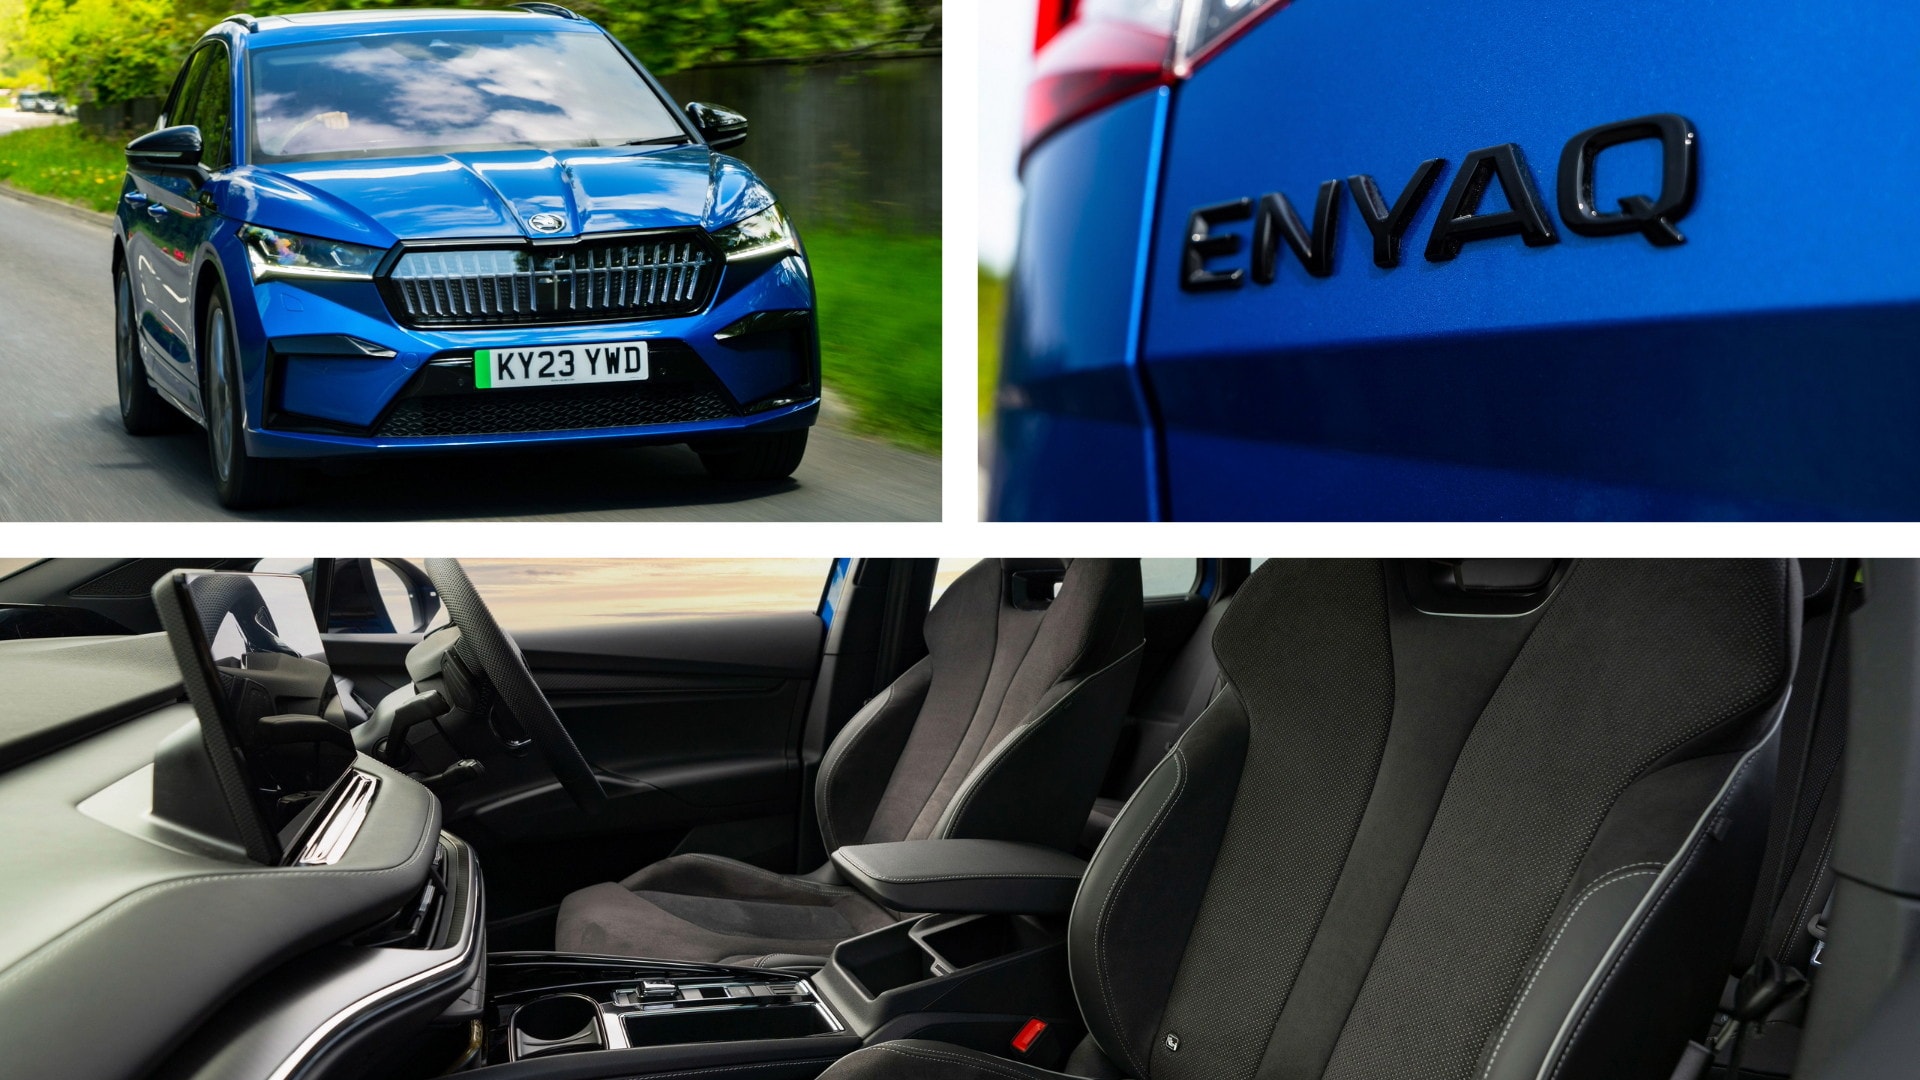 Skoda launches Enyaq L&K with 210 kW